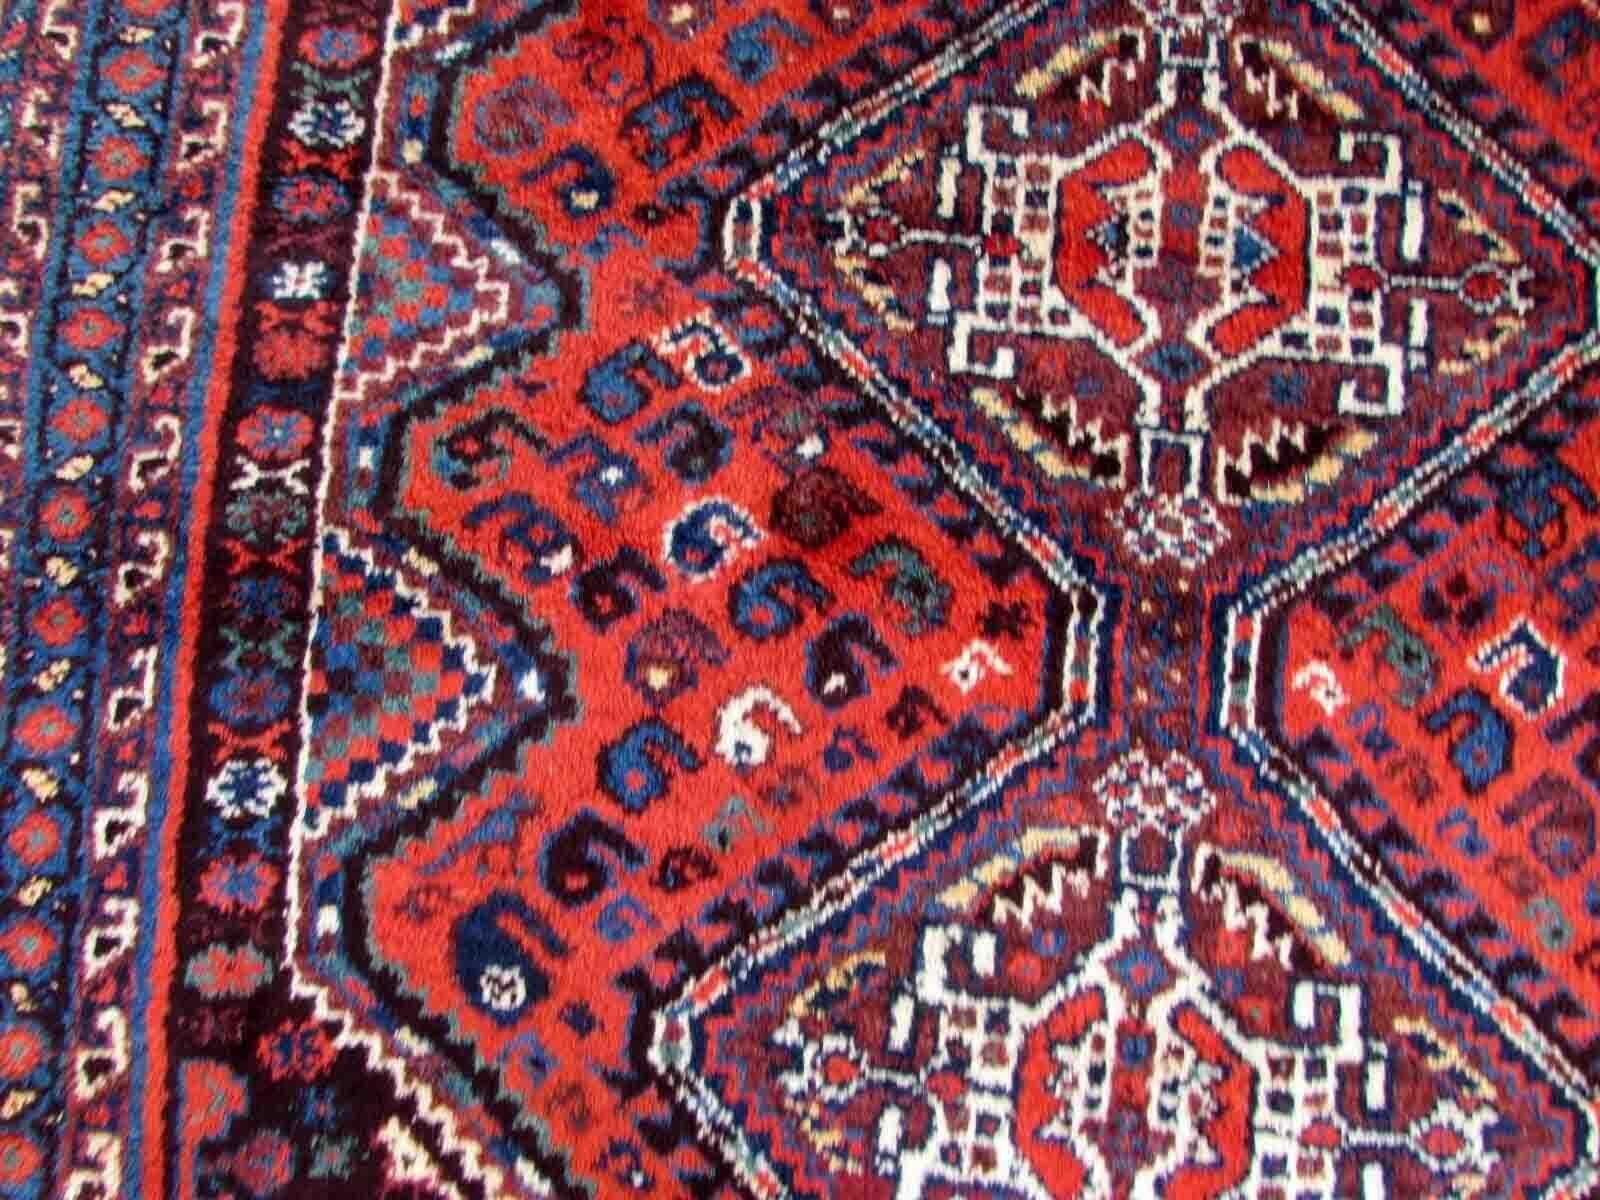 Handmade antique Shiraz rug in traditional medallion design. The rug is from the beginning of 20th century in original good condition.

Condition: original good,

circa 1910s

Size: 3.8' x 5' (116cm x 155cm),

material: wool,

country of